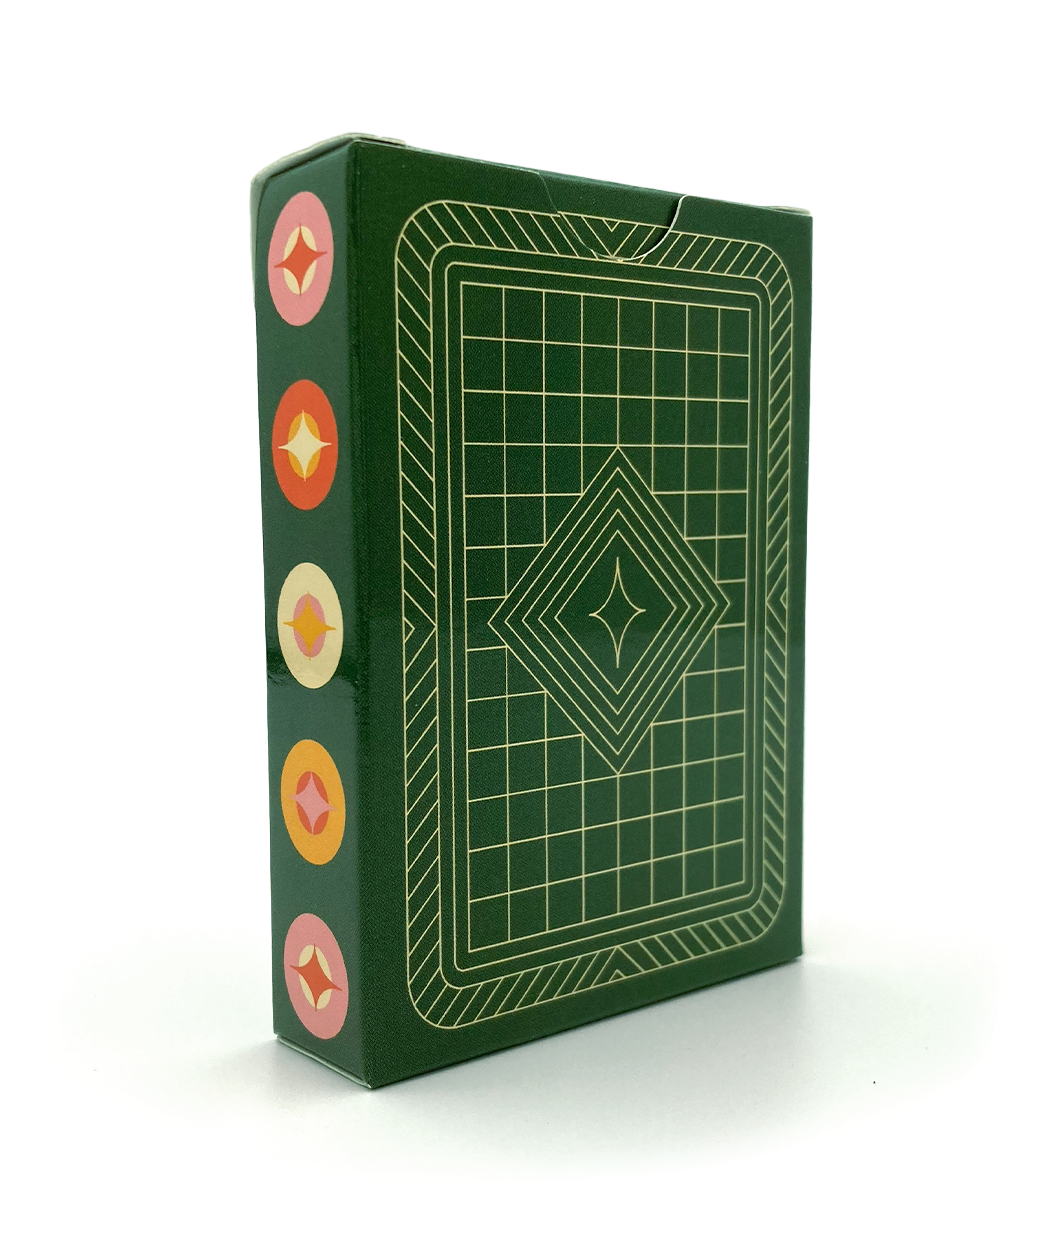 The box for the Nerdfighter playing cards - dark green with a line pattern. 